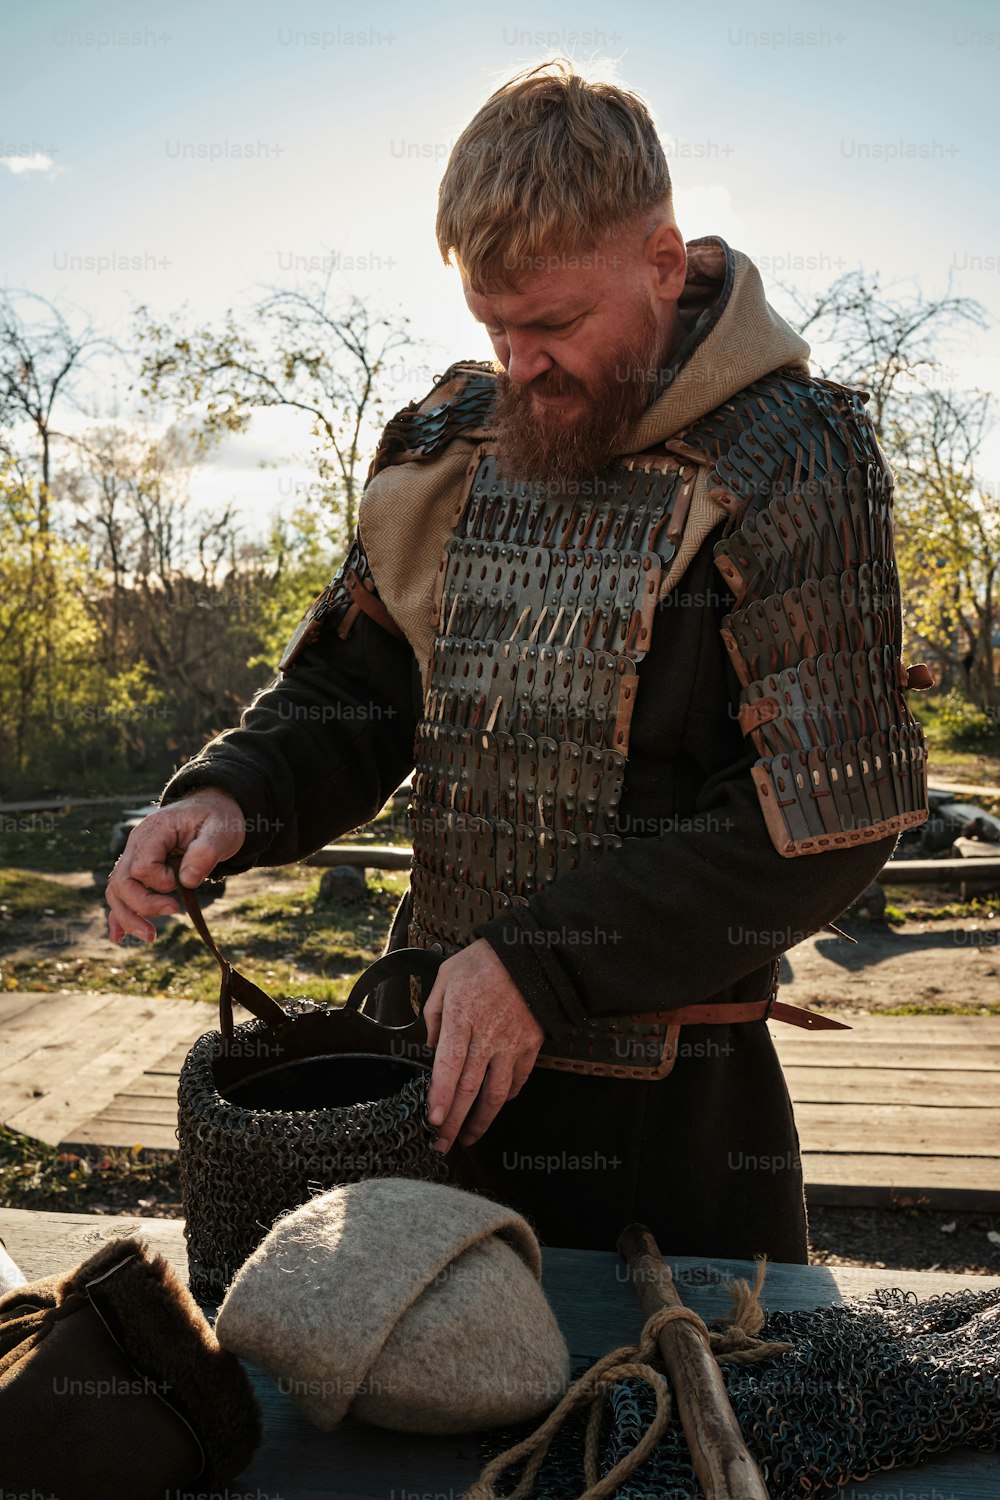 a man in a medieval costume holding a basket